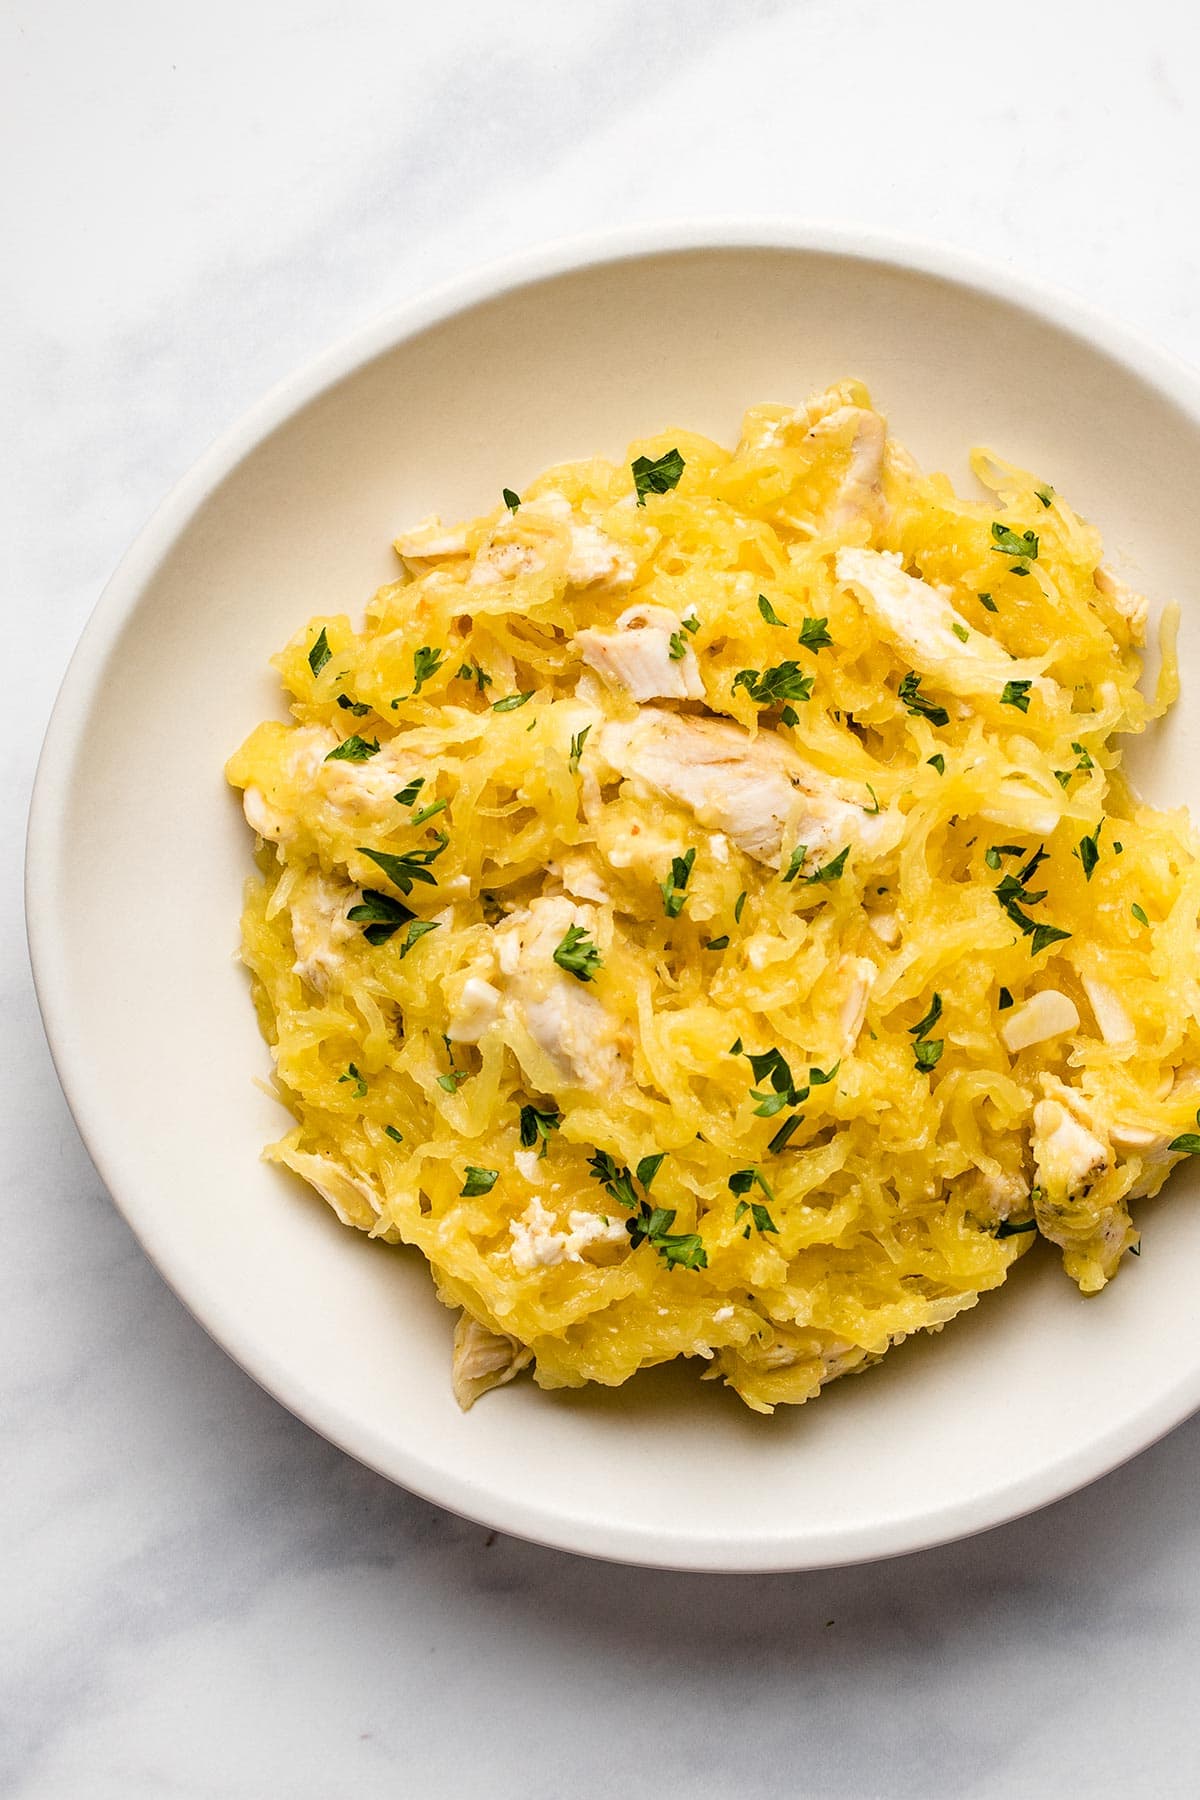 Spaghetti squash mixed with sliced chicken garnished with fresh parsley on a white plate viewed from overhead.